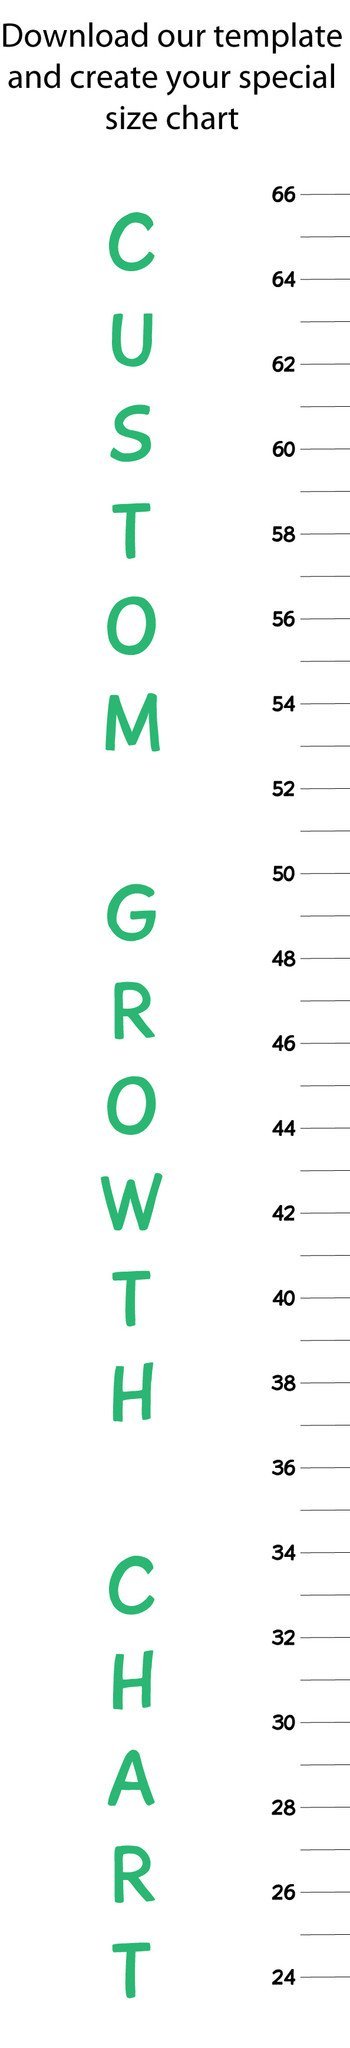 Custom Growth And Size Chart  - Size: 8" x 48"